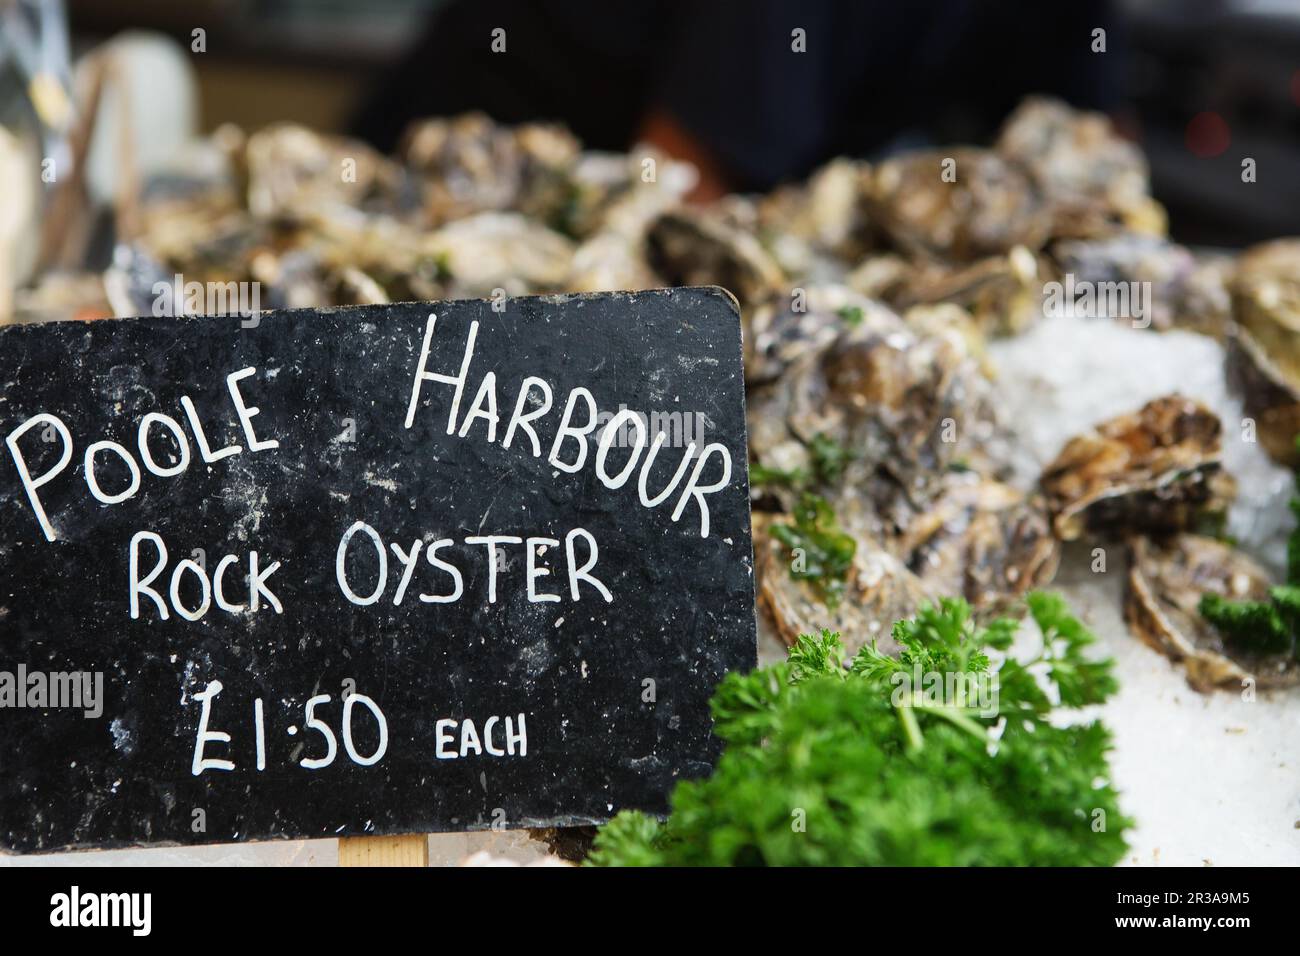 Poole harbour rock oyster with a price label on fish market Stock Photo